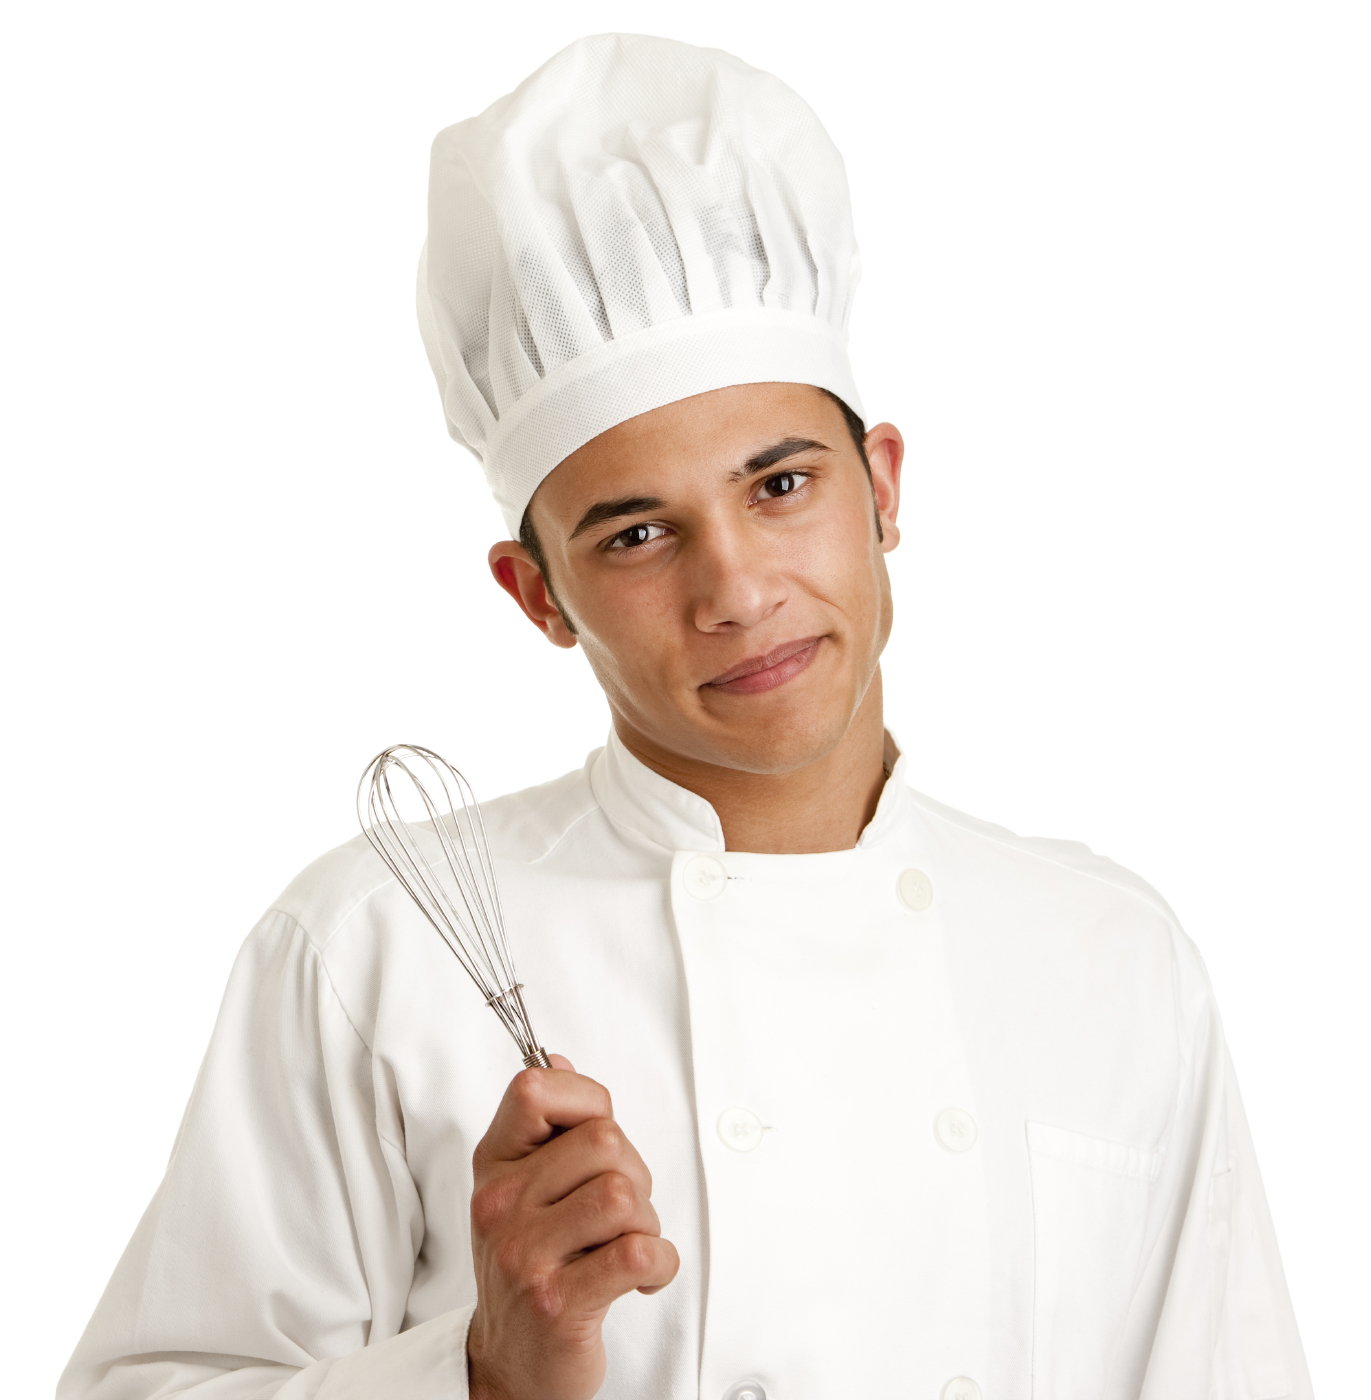 Teenage boy chef learn to cook over the summer